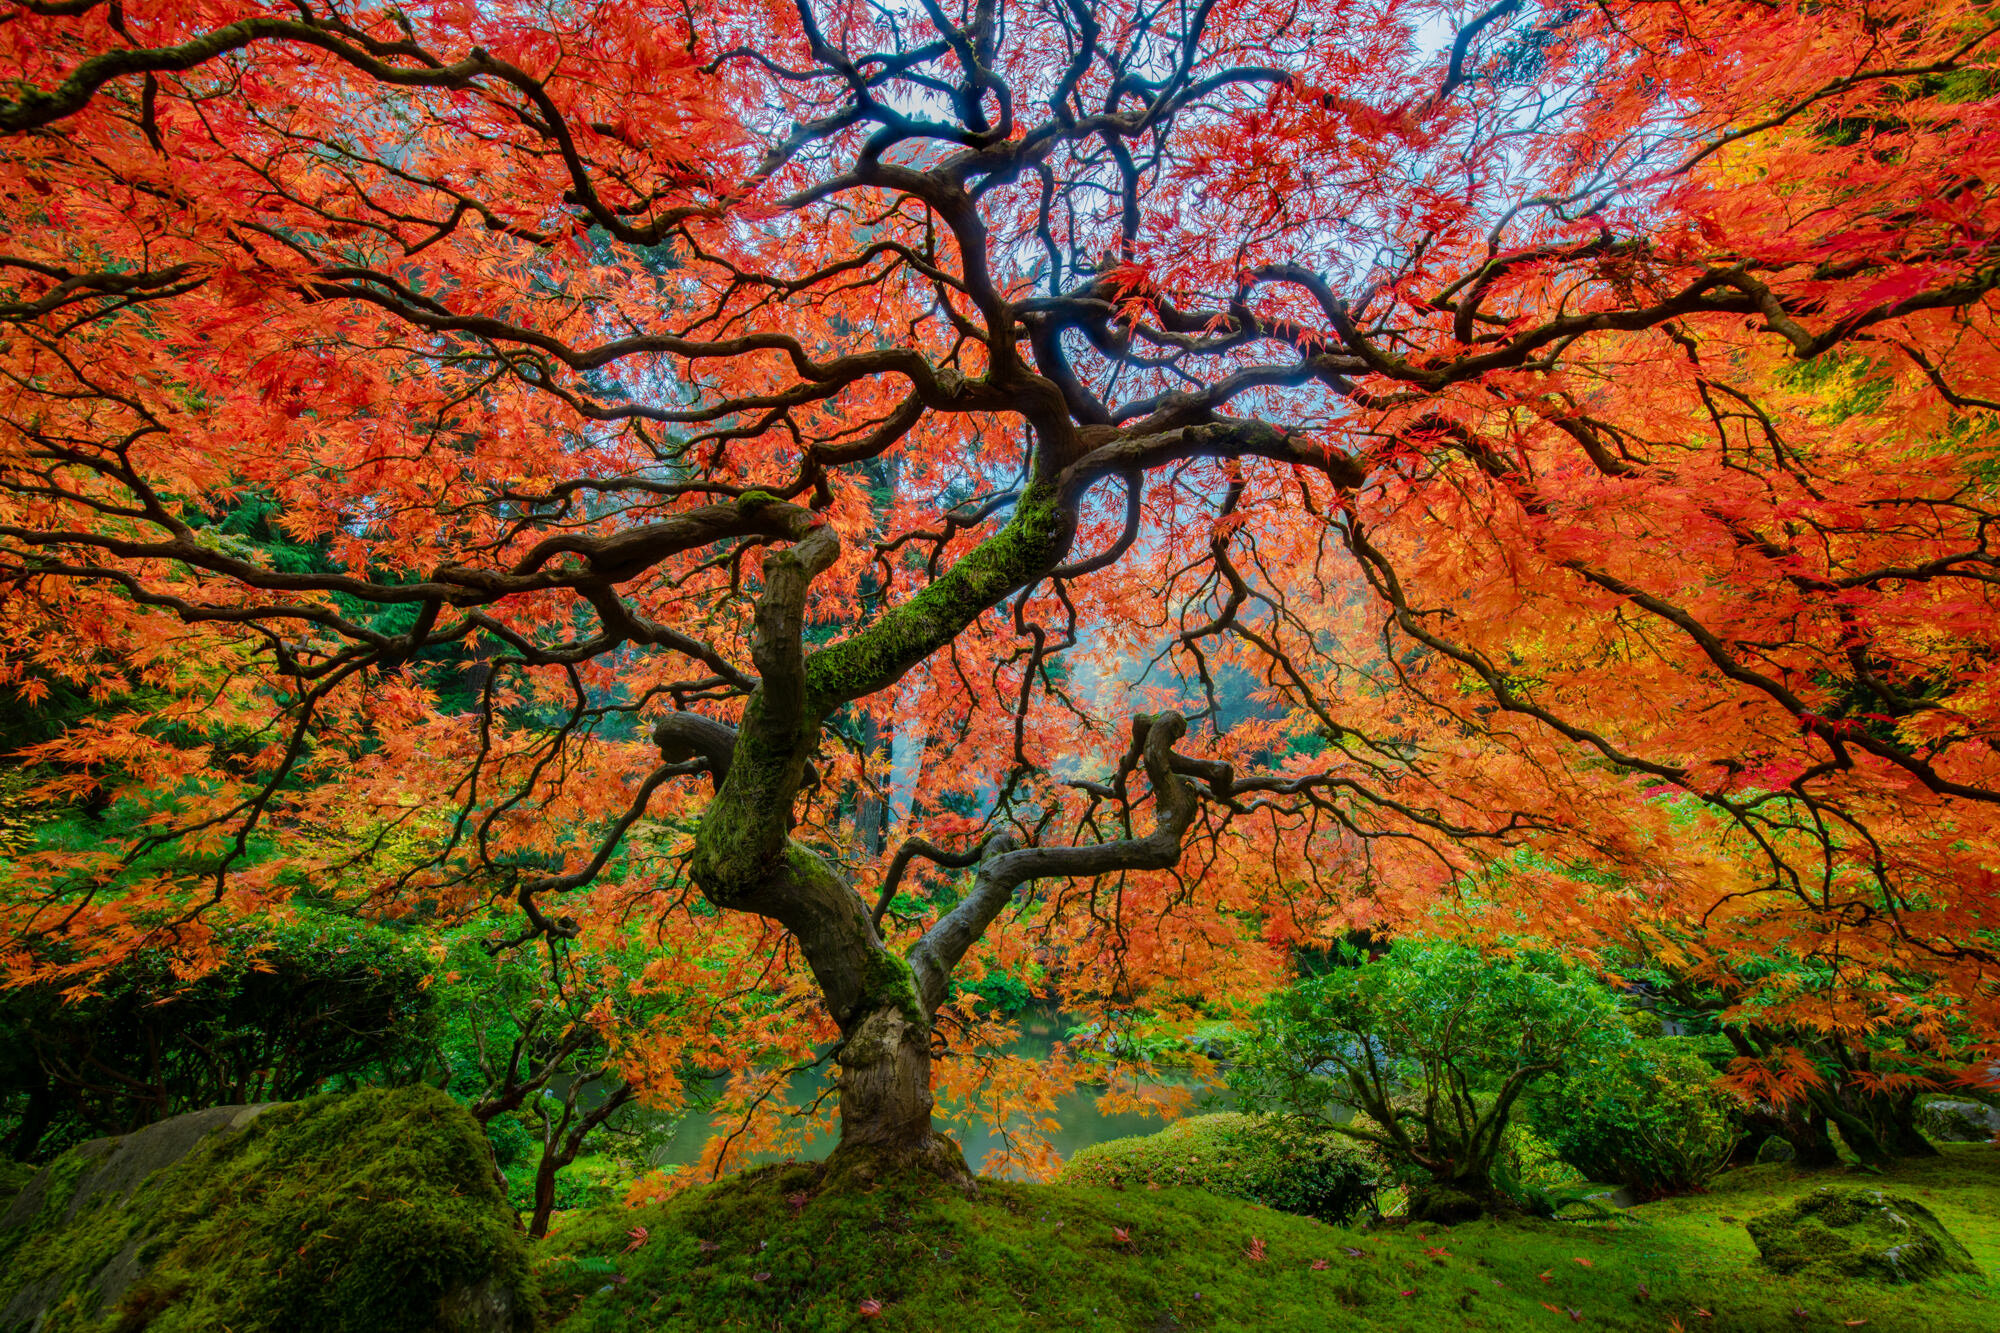 Japanese Maple with colorful Autumn leaves at the Portland Japanese Garden - photographed by Chris Byrne. | Photo Title: Dreamcatcher | 
        Photo by Chris Byrne ©2023